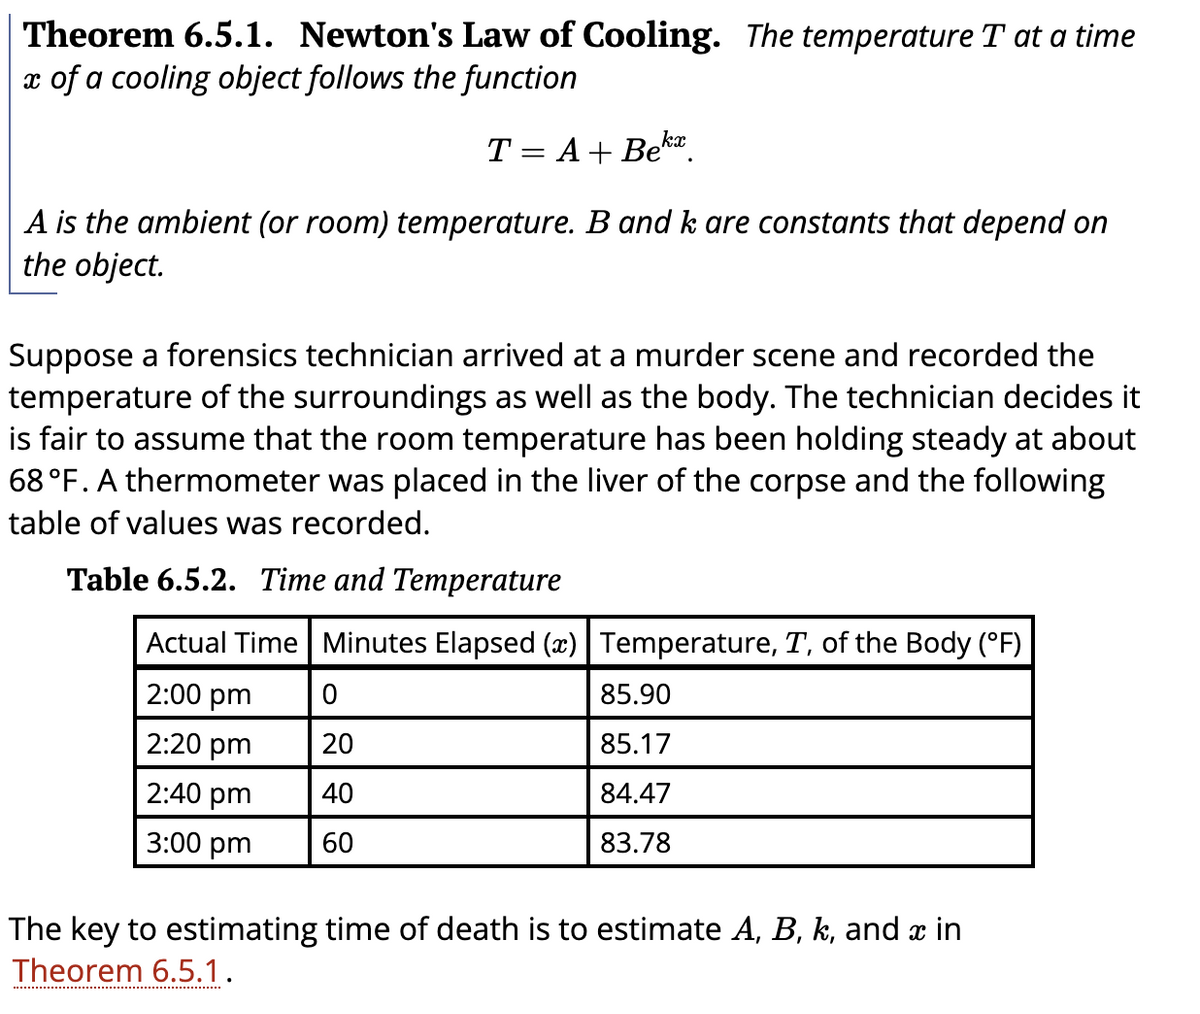 Theorem 6.5.1. Newton's Law of Cooling. The temperature T at a time
x of a cooling object follows the function
T = A+ Bek.
||
A is the ambient (or room) temperature. B and k are constants that depend on
the object.
Suppose a forensics technician arrived at a murder scene and recorded the
temperature of the surroundings as well as the body. The technician decides it
is fair to assume that the room temperature has been holding steady at about
68 °F. A thermometer was placed in the liver of the corpse and the following
table of values was recorded.
Table 6.5.2. Time and Temperature
Actual Time Minutes Elapsed (x)|Temperature, T, of the Body (°F)
2:00 pm
85.90
2:20 pm
20
85.17
2:40 pm
40
84.47
3:00 pm
60
83.78
The key to estimating time of death is to estimate A, B, k, and x in
Theorem 6.5.1.
